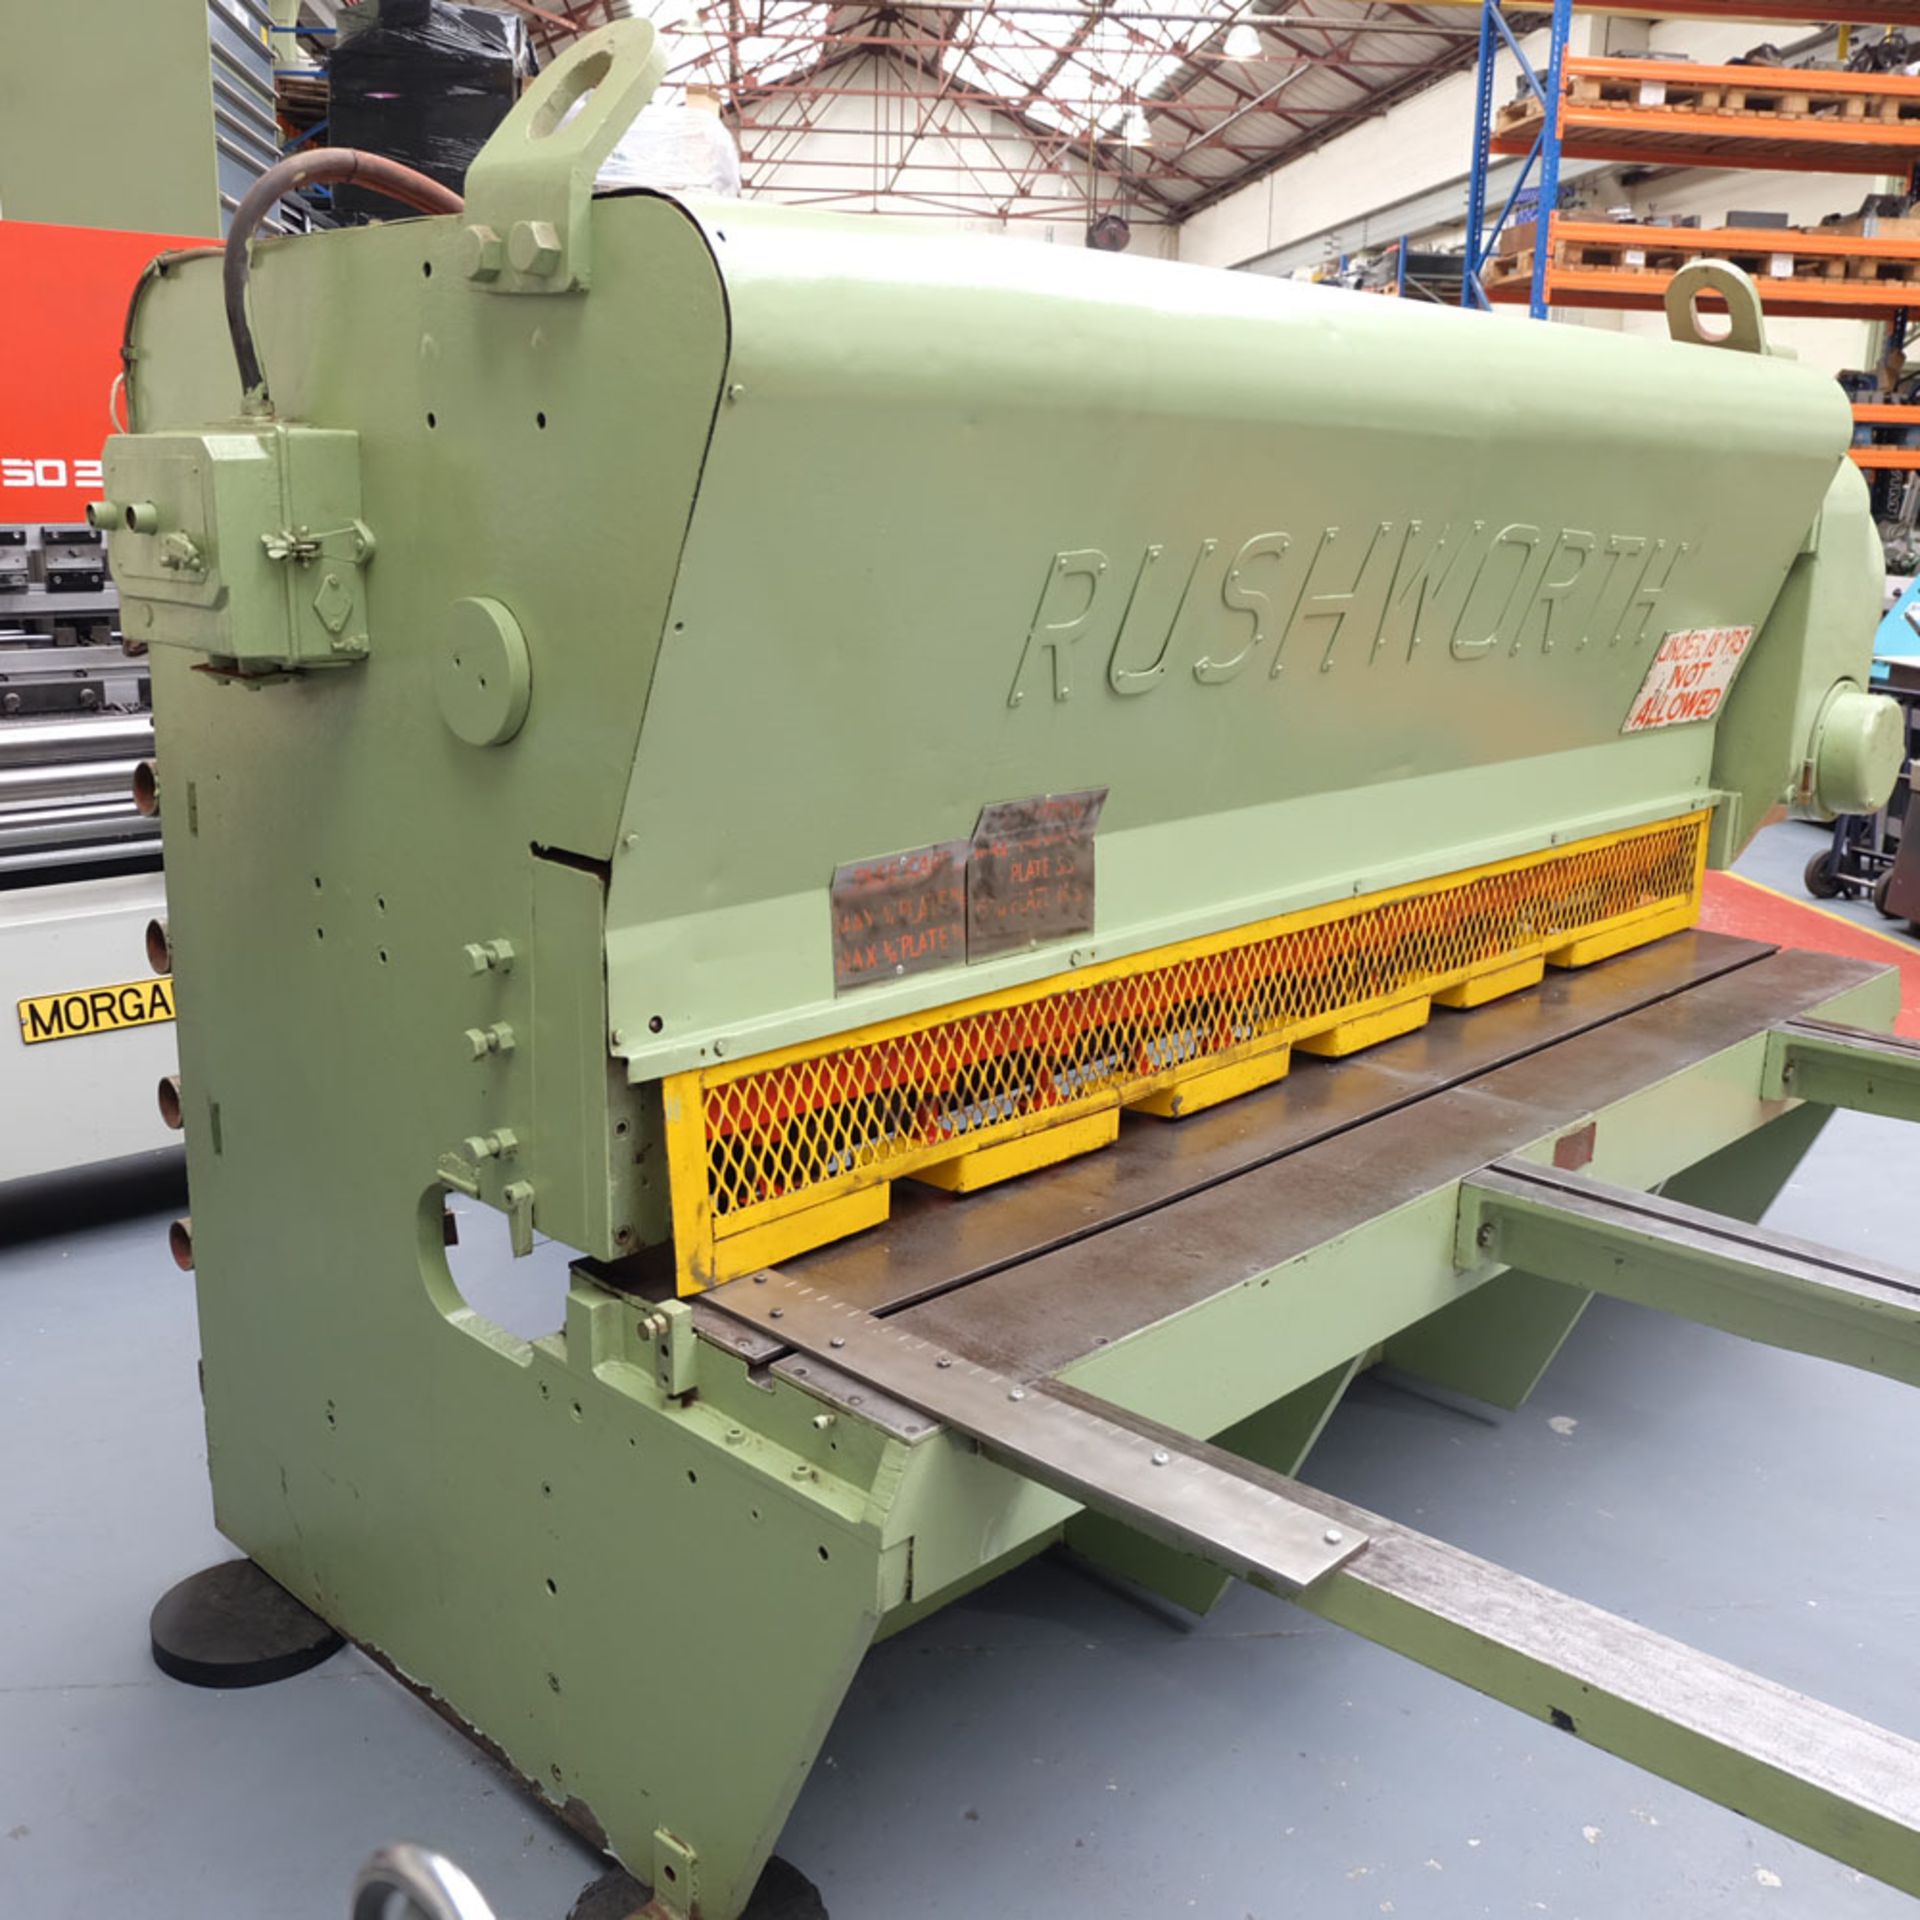 Rushworth Guillotine. Capacity: 8FT x 1/4". Capacity: Stainless Steel: 3/16"(5mm). - Image 4 of 7